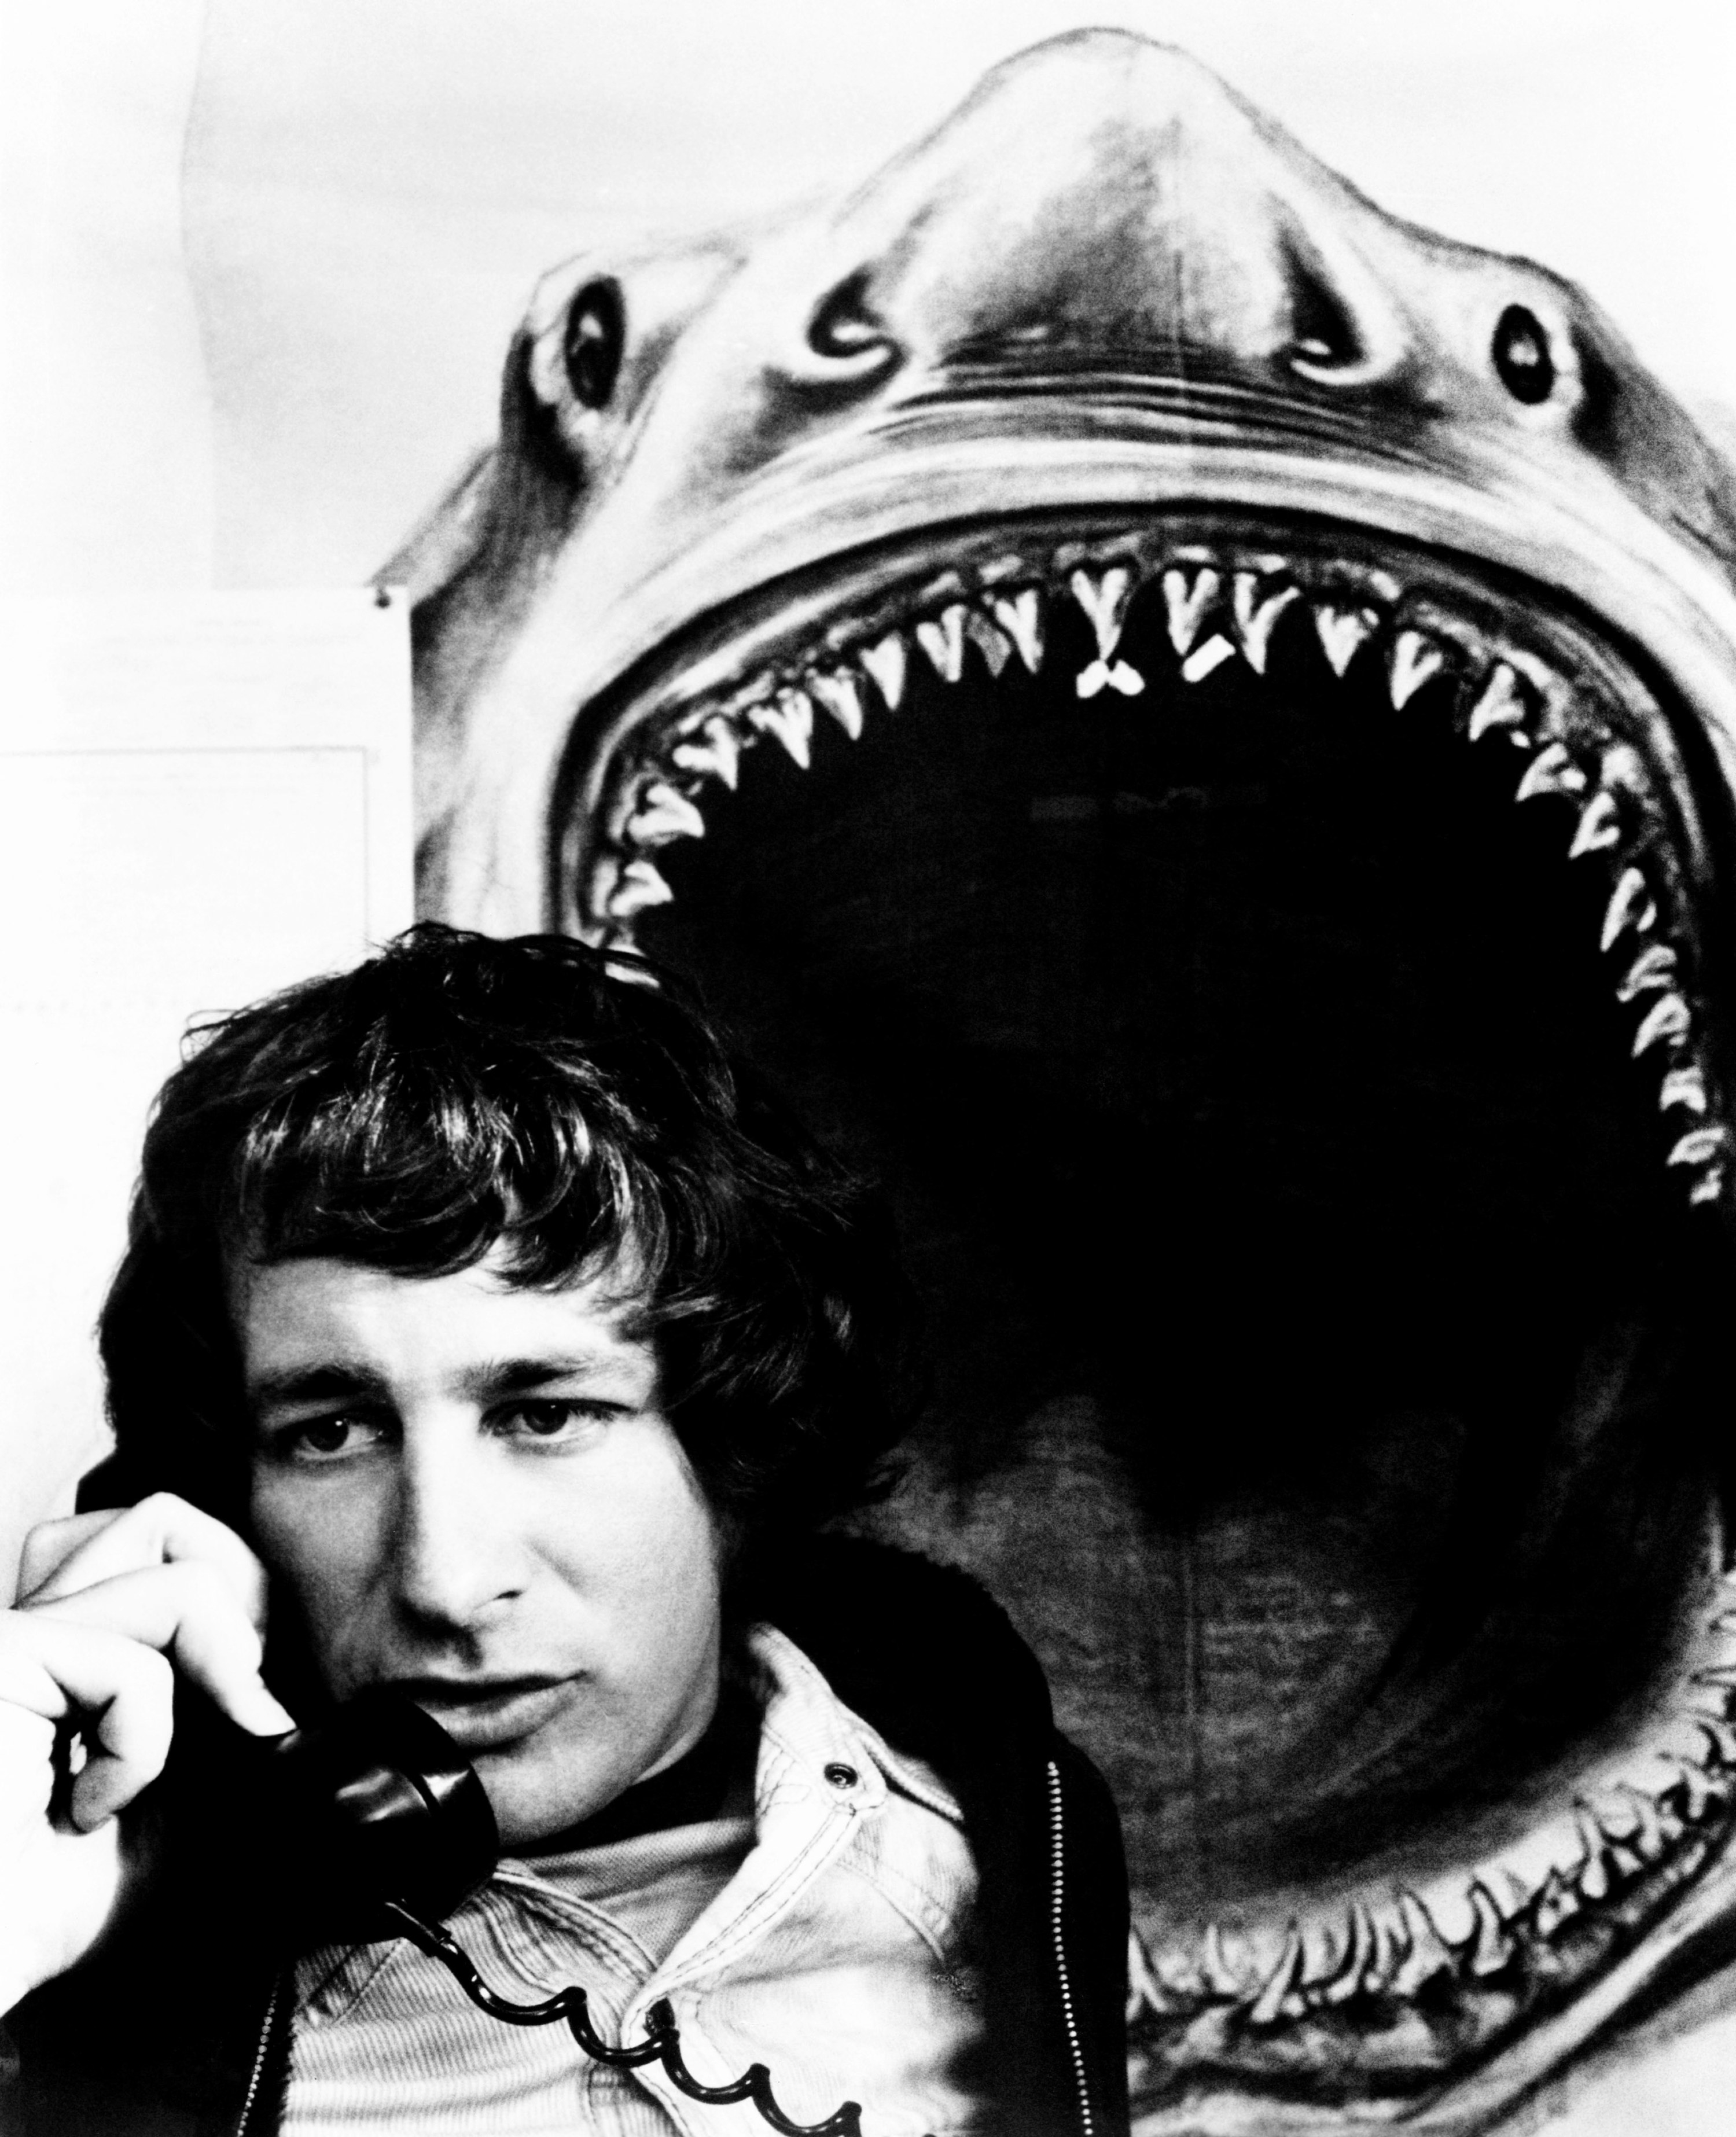 A man takes a phone call in front of a shark